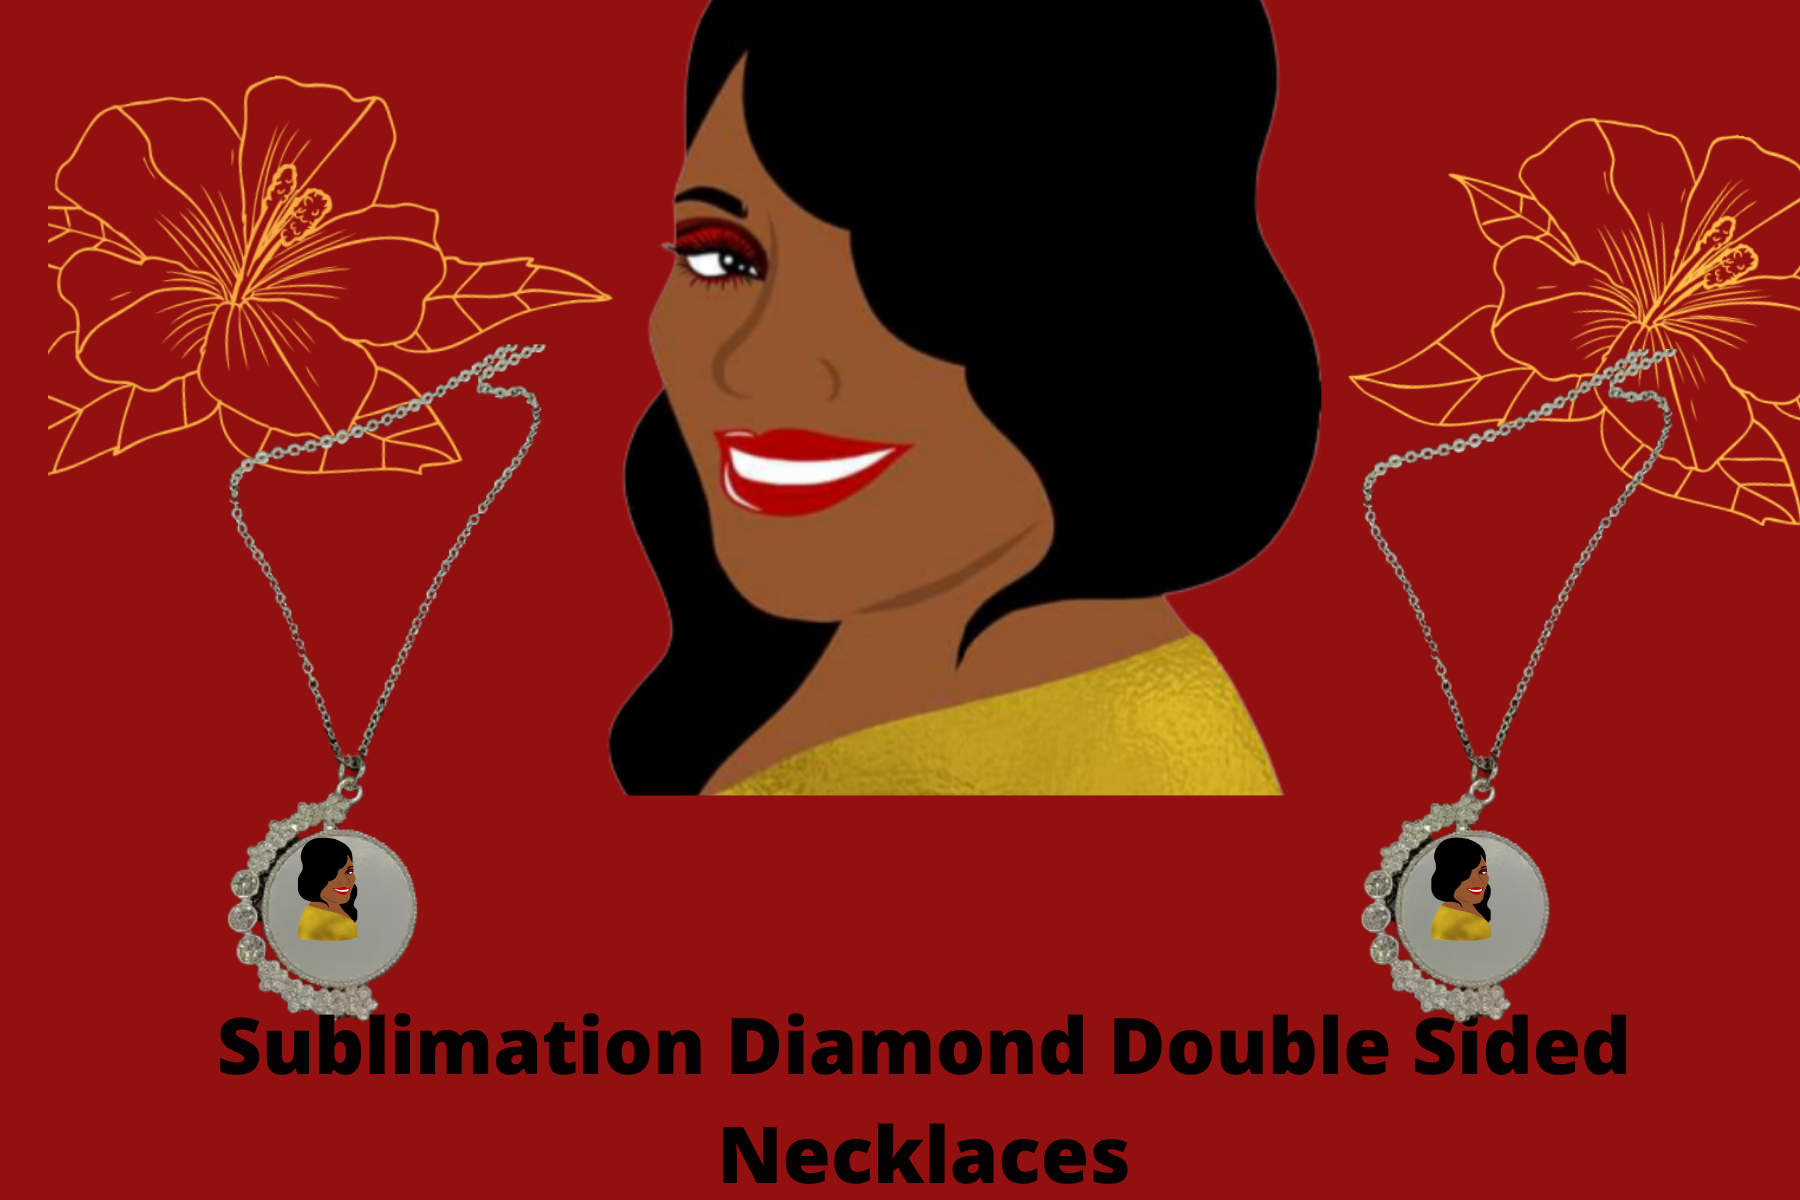 Sublimation Diamond Double Sided Necklaces